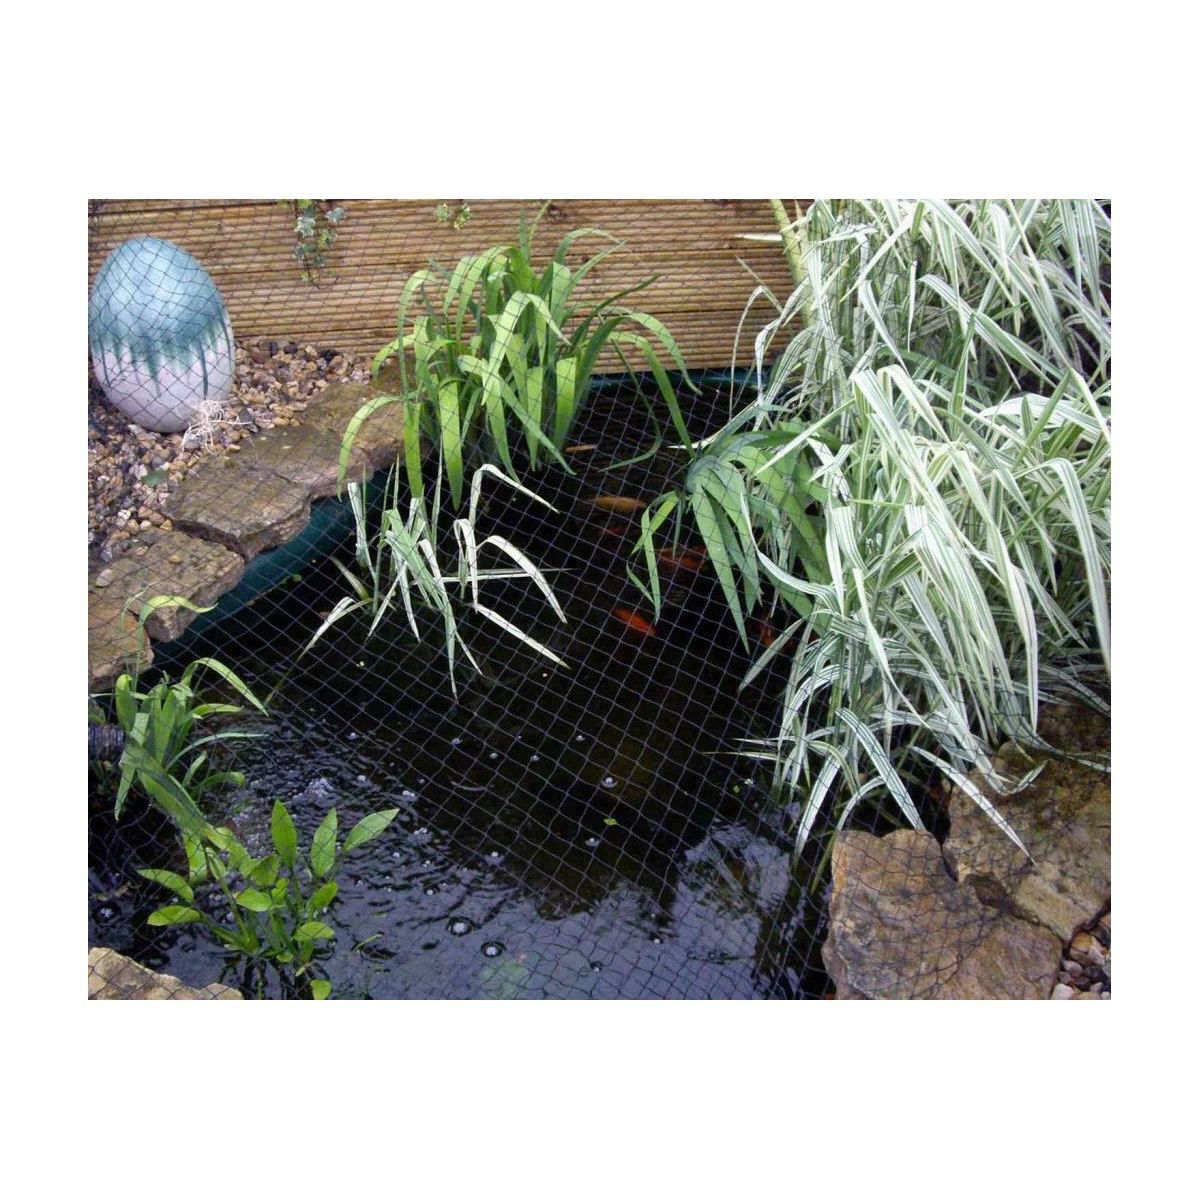 Net for Protecting Garden Ponds